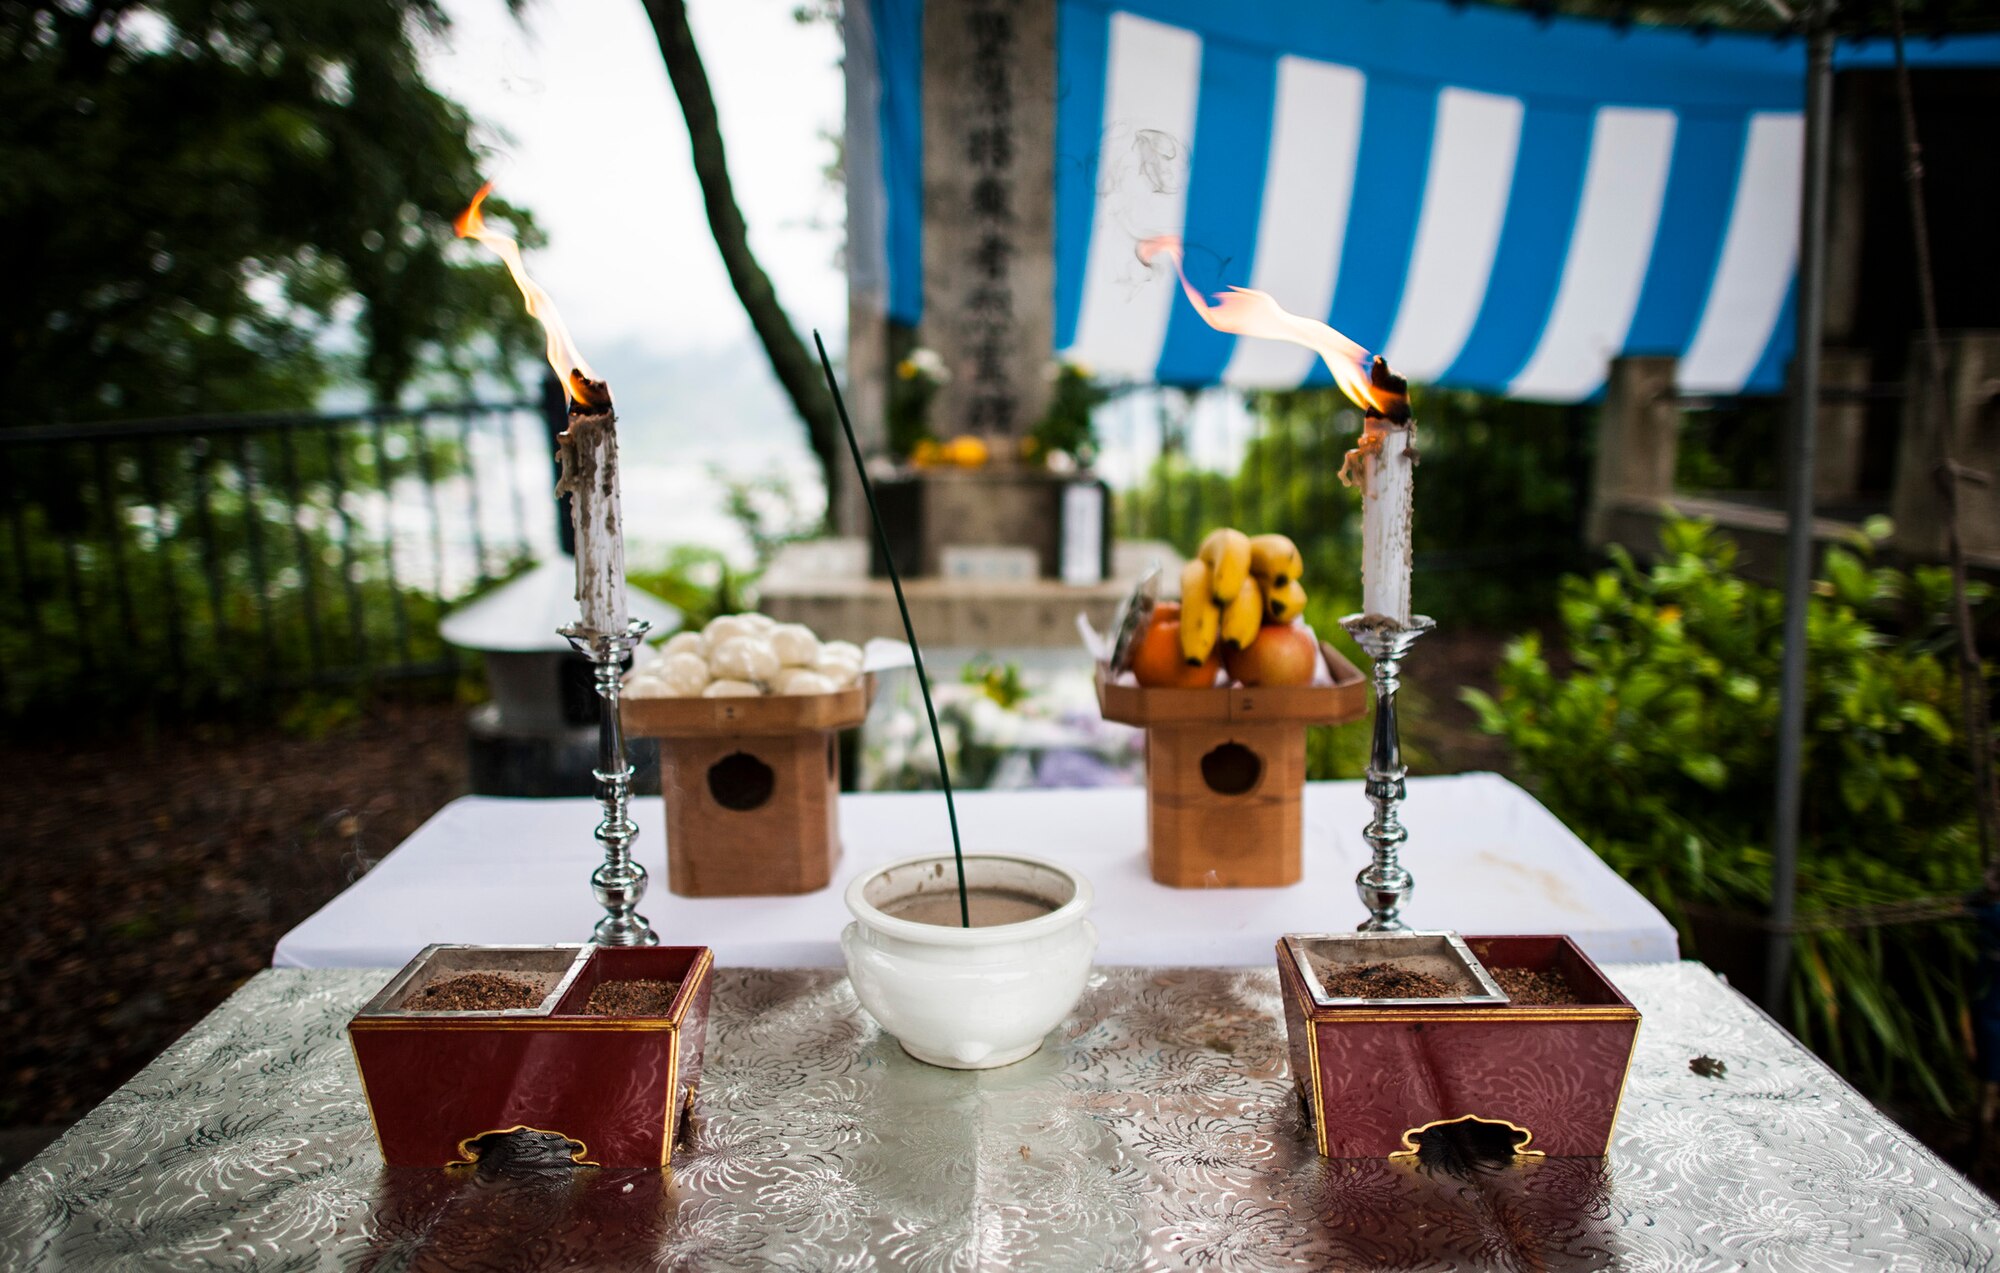 SHIZUOKA, Japan -- Traditional Buddhist offerings to the deceased stand on a table during a B-29 memorial ceremony on Mount Shizuhata, Shizuoka, Japan, June 16, 2012. Americans and Japanese ceremony attendees honored those who died in Shizuoka on June 19, 1945, during a B-29 bombing raid and aircraft crash. (U.S. Air Force photo by Tech. Sgt. Samuel Morse)